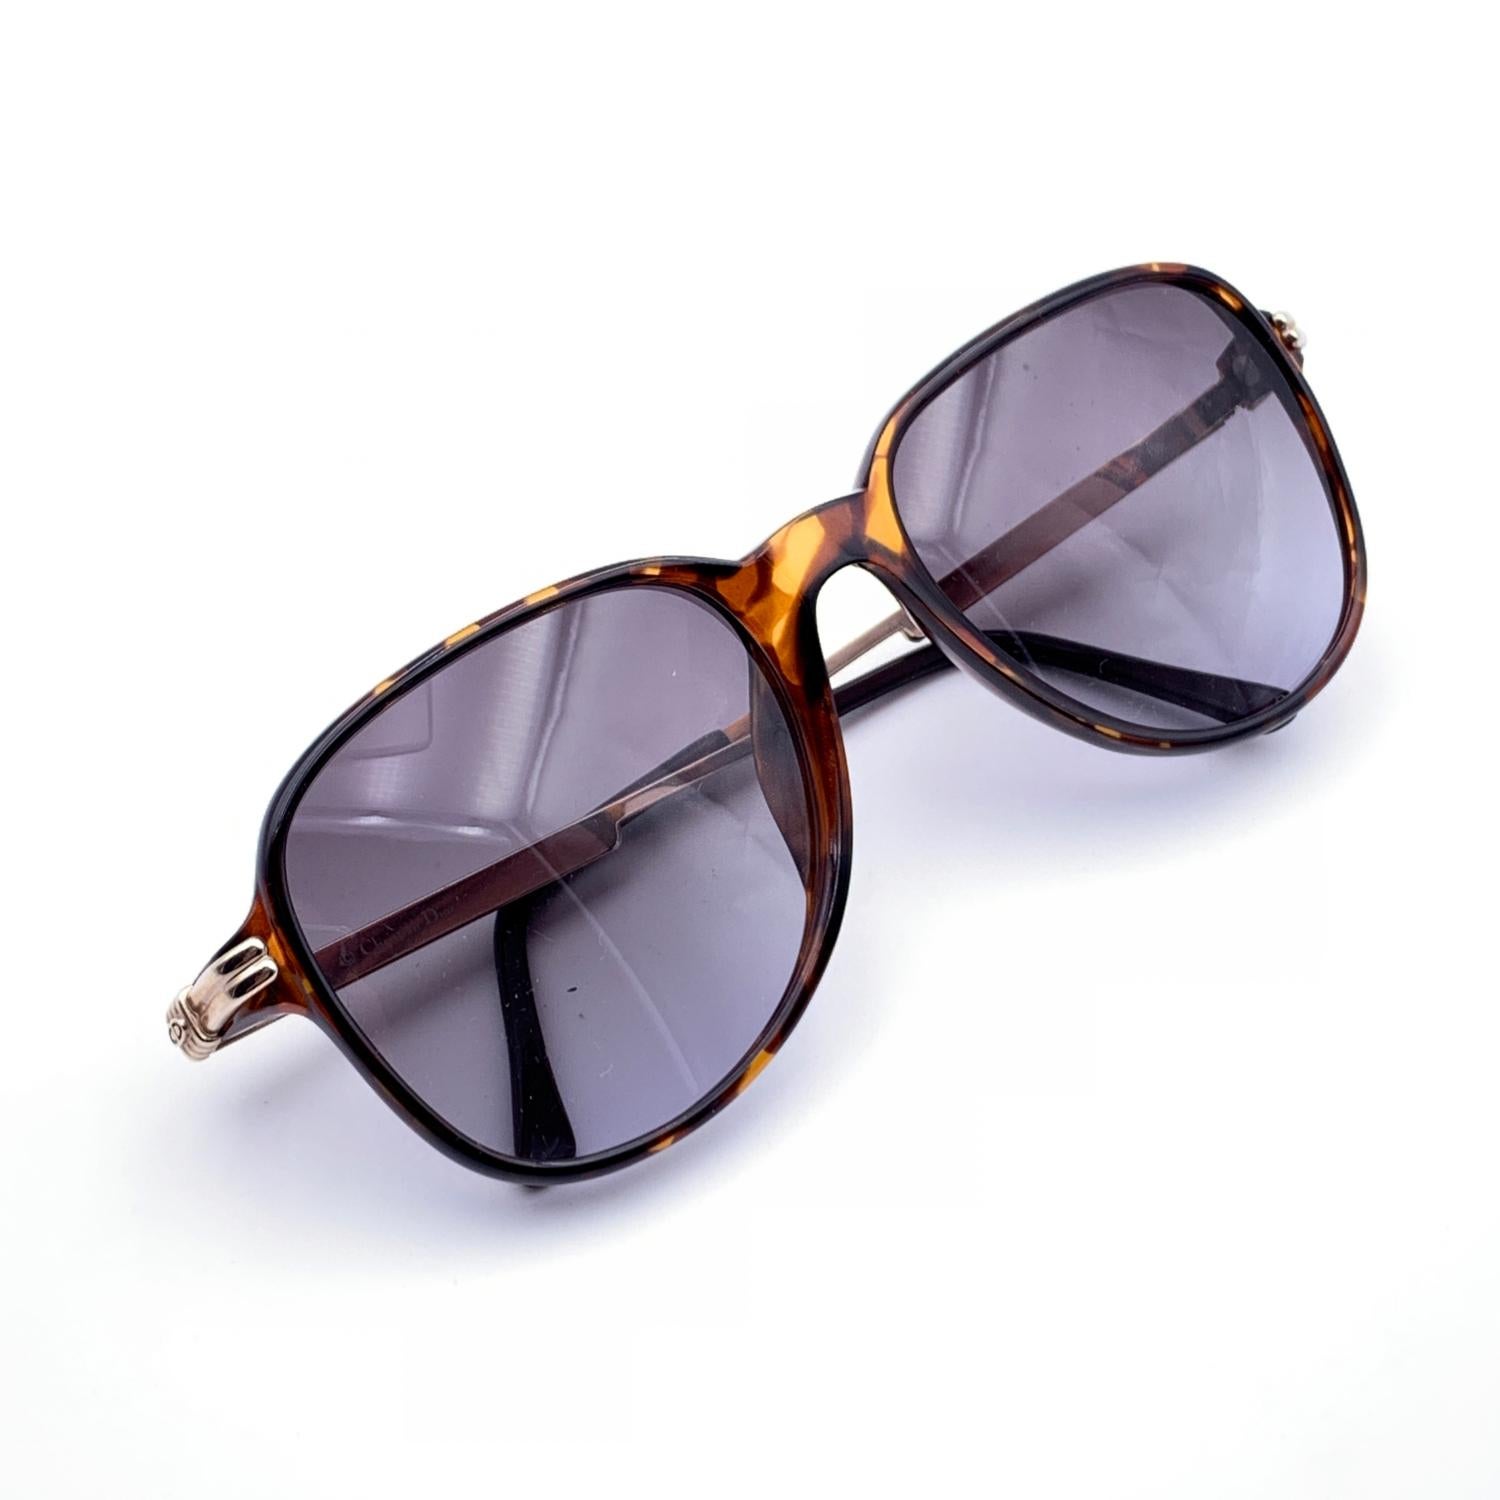 Vintage Christian Dior sunglasses, Mod. 2522 - Col 10.Brown Optyl frame with gold metal ear stems. Rectangular design design. Original 100% Total UVA/UVB protection lenses in gradient grey color. CD logo on temples. Made in